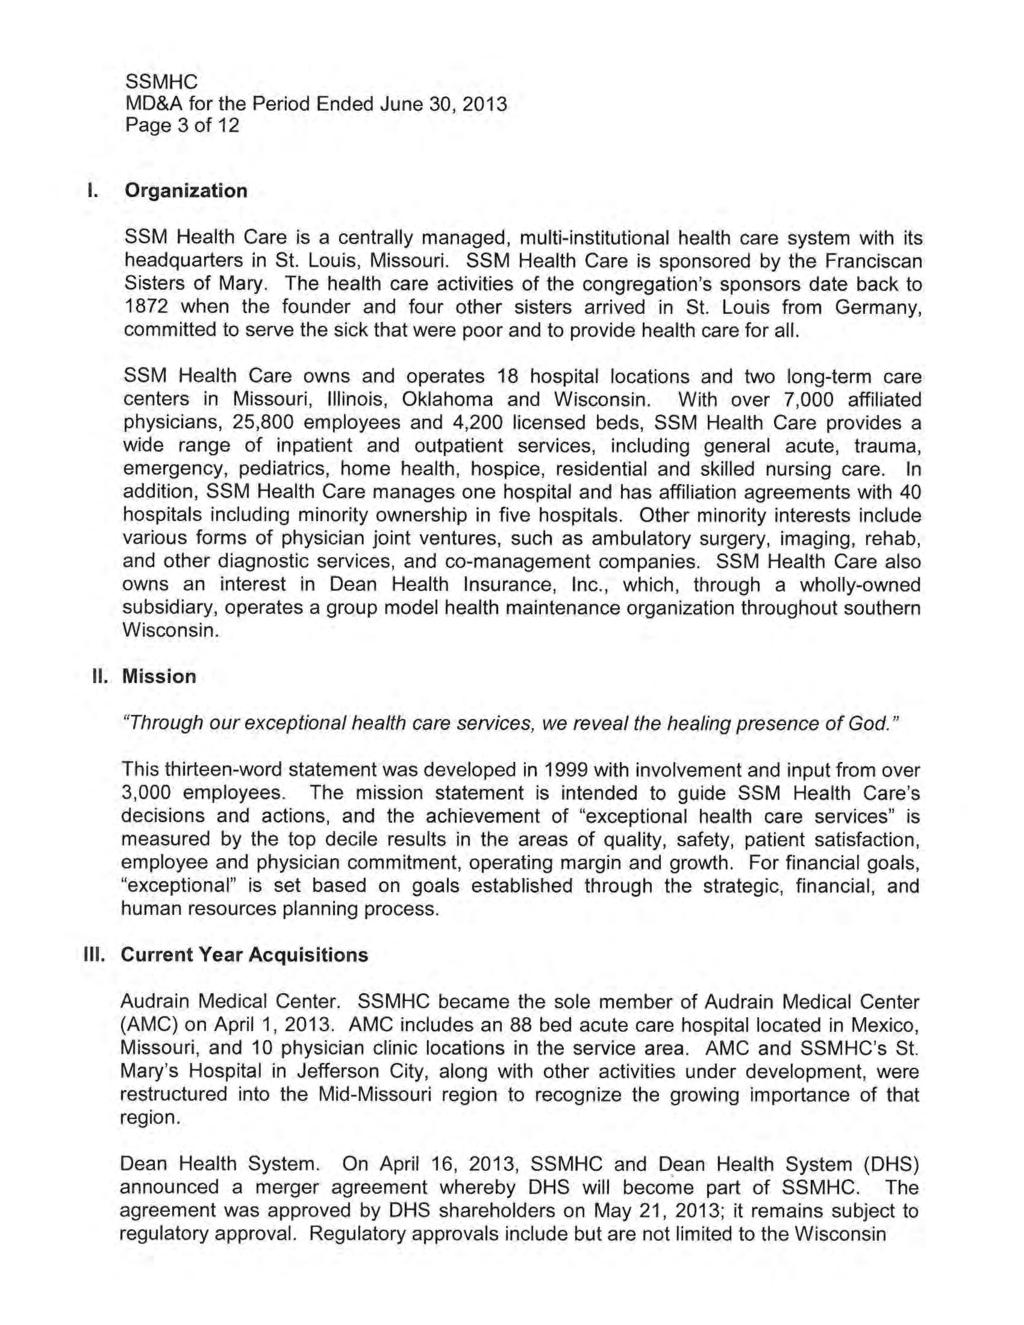 SSMHC MD&A for the Period Ended June 30, 2013 Page 3 of 12 I. Organization SSM Health Care is a centrally managed, multi-institutional health care system with its headquarters in St. Louis, Missouri.